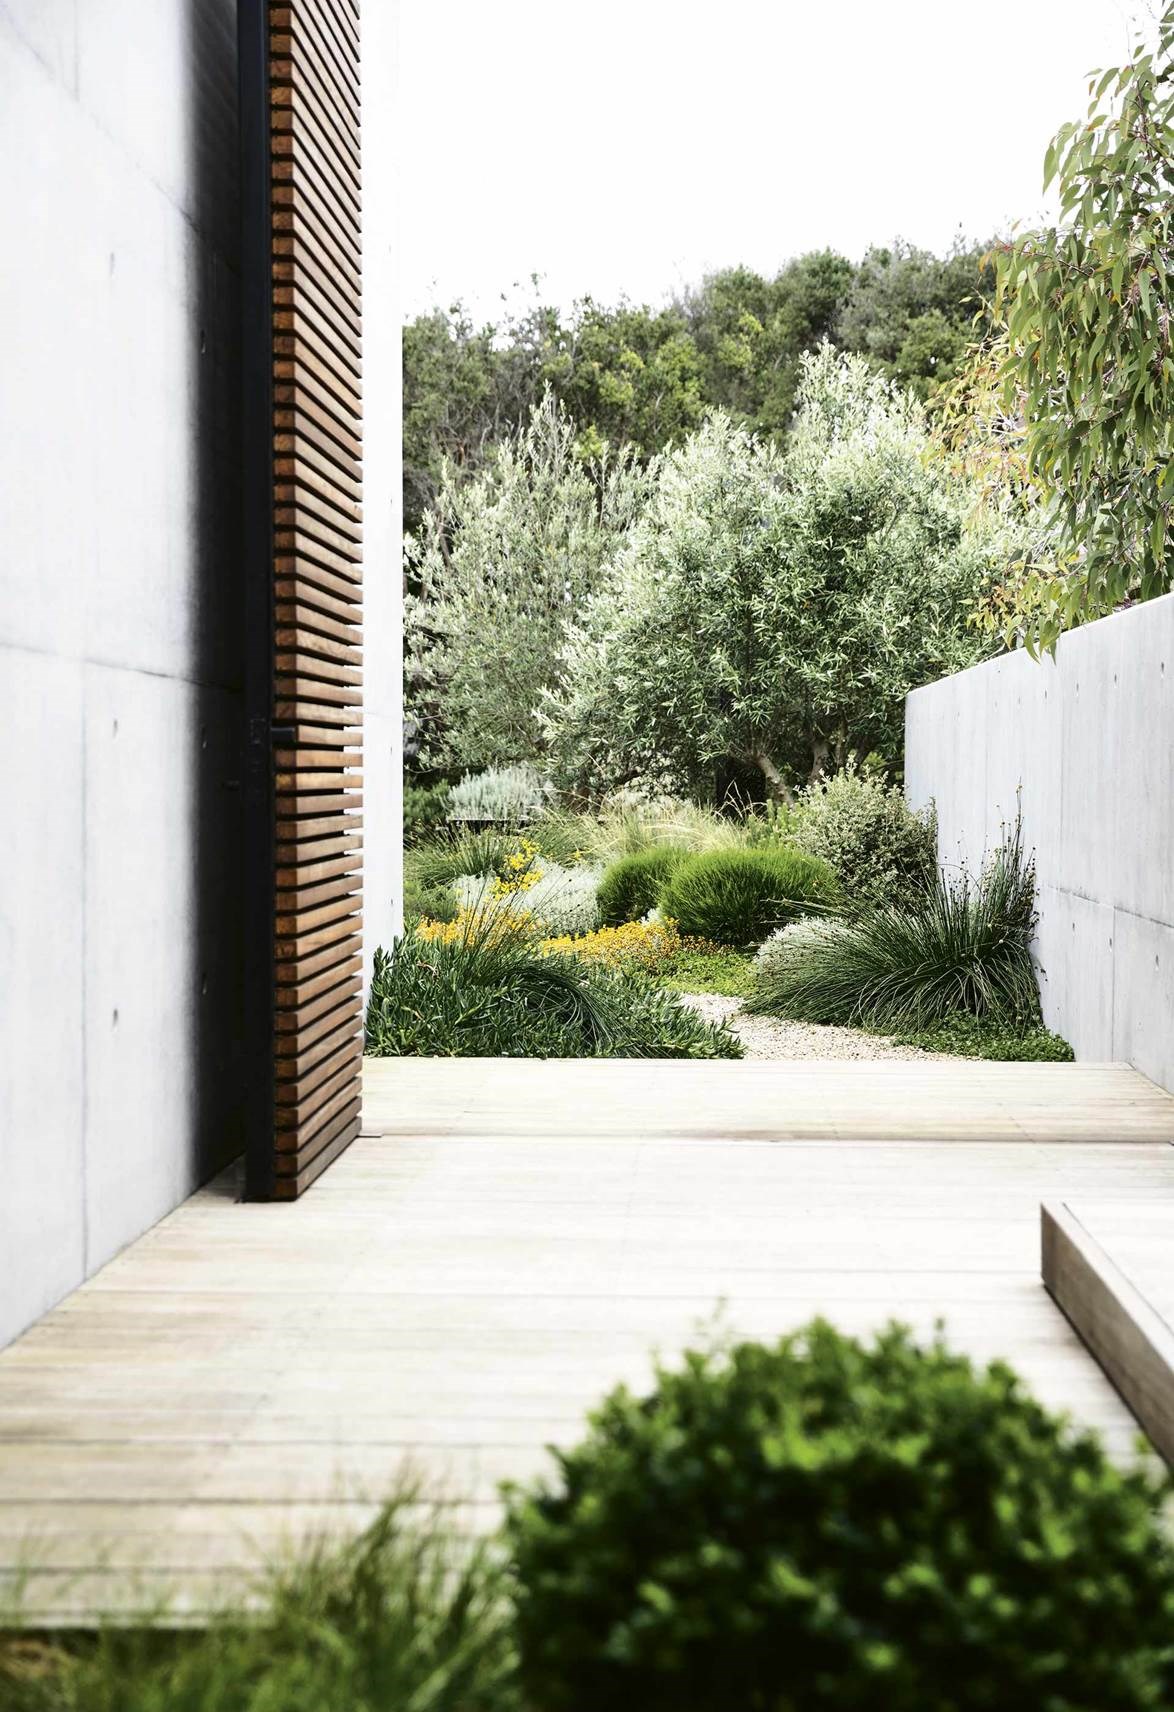 The entryway to this [Mornington Peninsula home](https://www.homestolove.com.au/coastal-native-garden-18599|target="_blank") features soft planting of native grasses and ground cover that stretches from the road, as well as three mature olive trees that were rescued from a local olive farm.